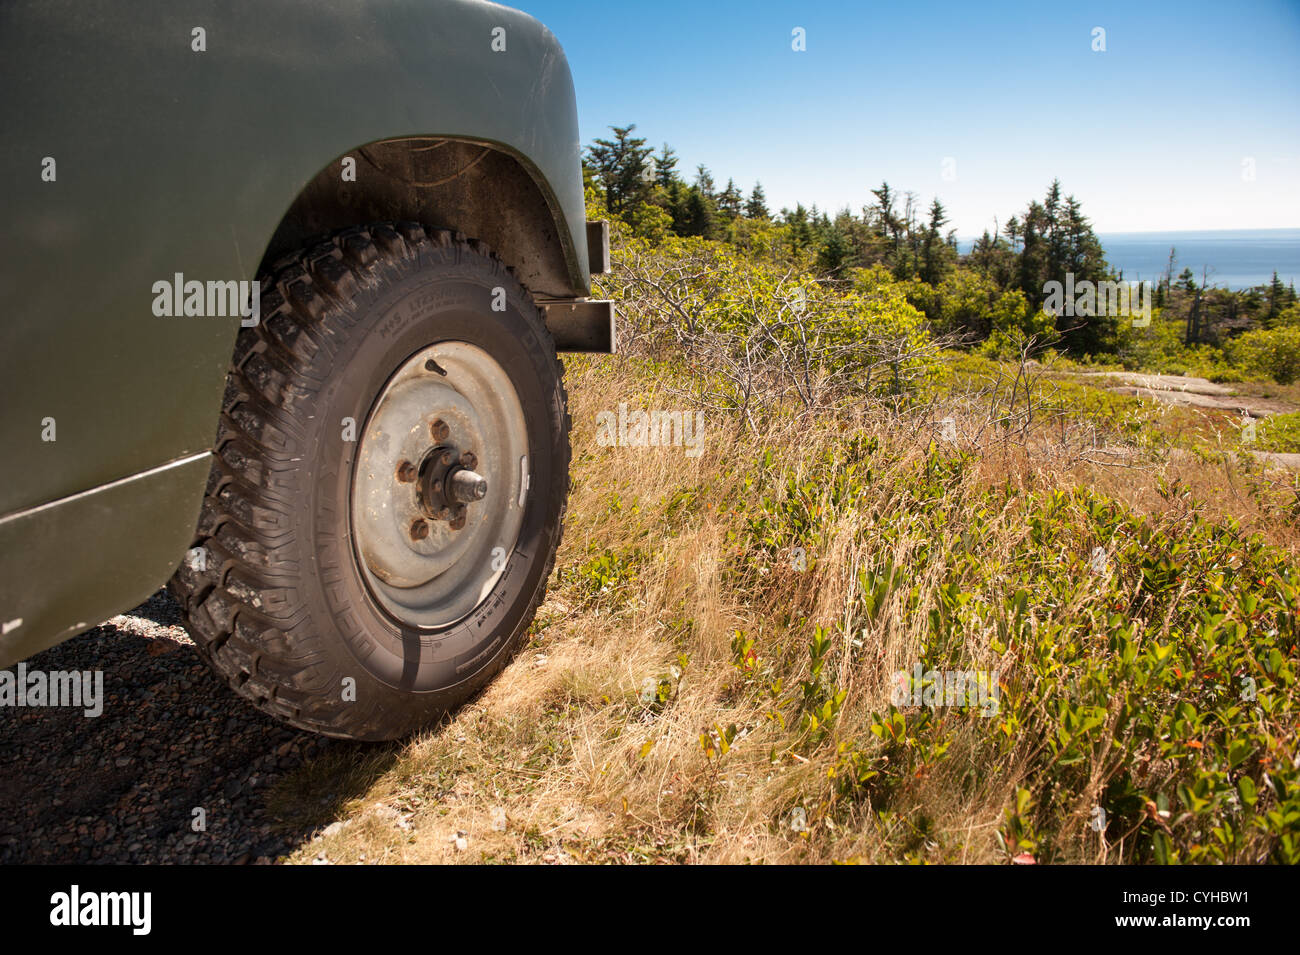 Truck wheel off road in landscape of Acadia National Park, Bar Harbor ME Stock Photo